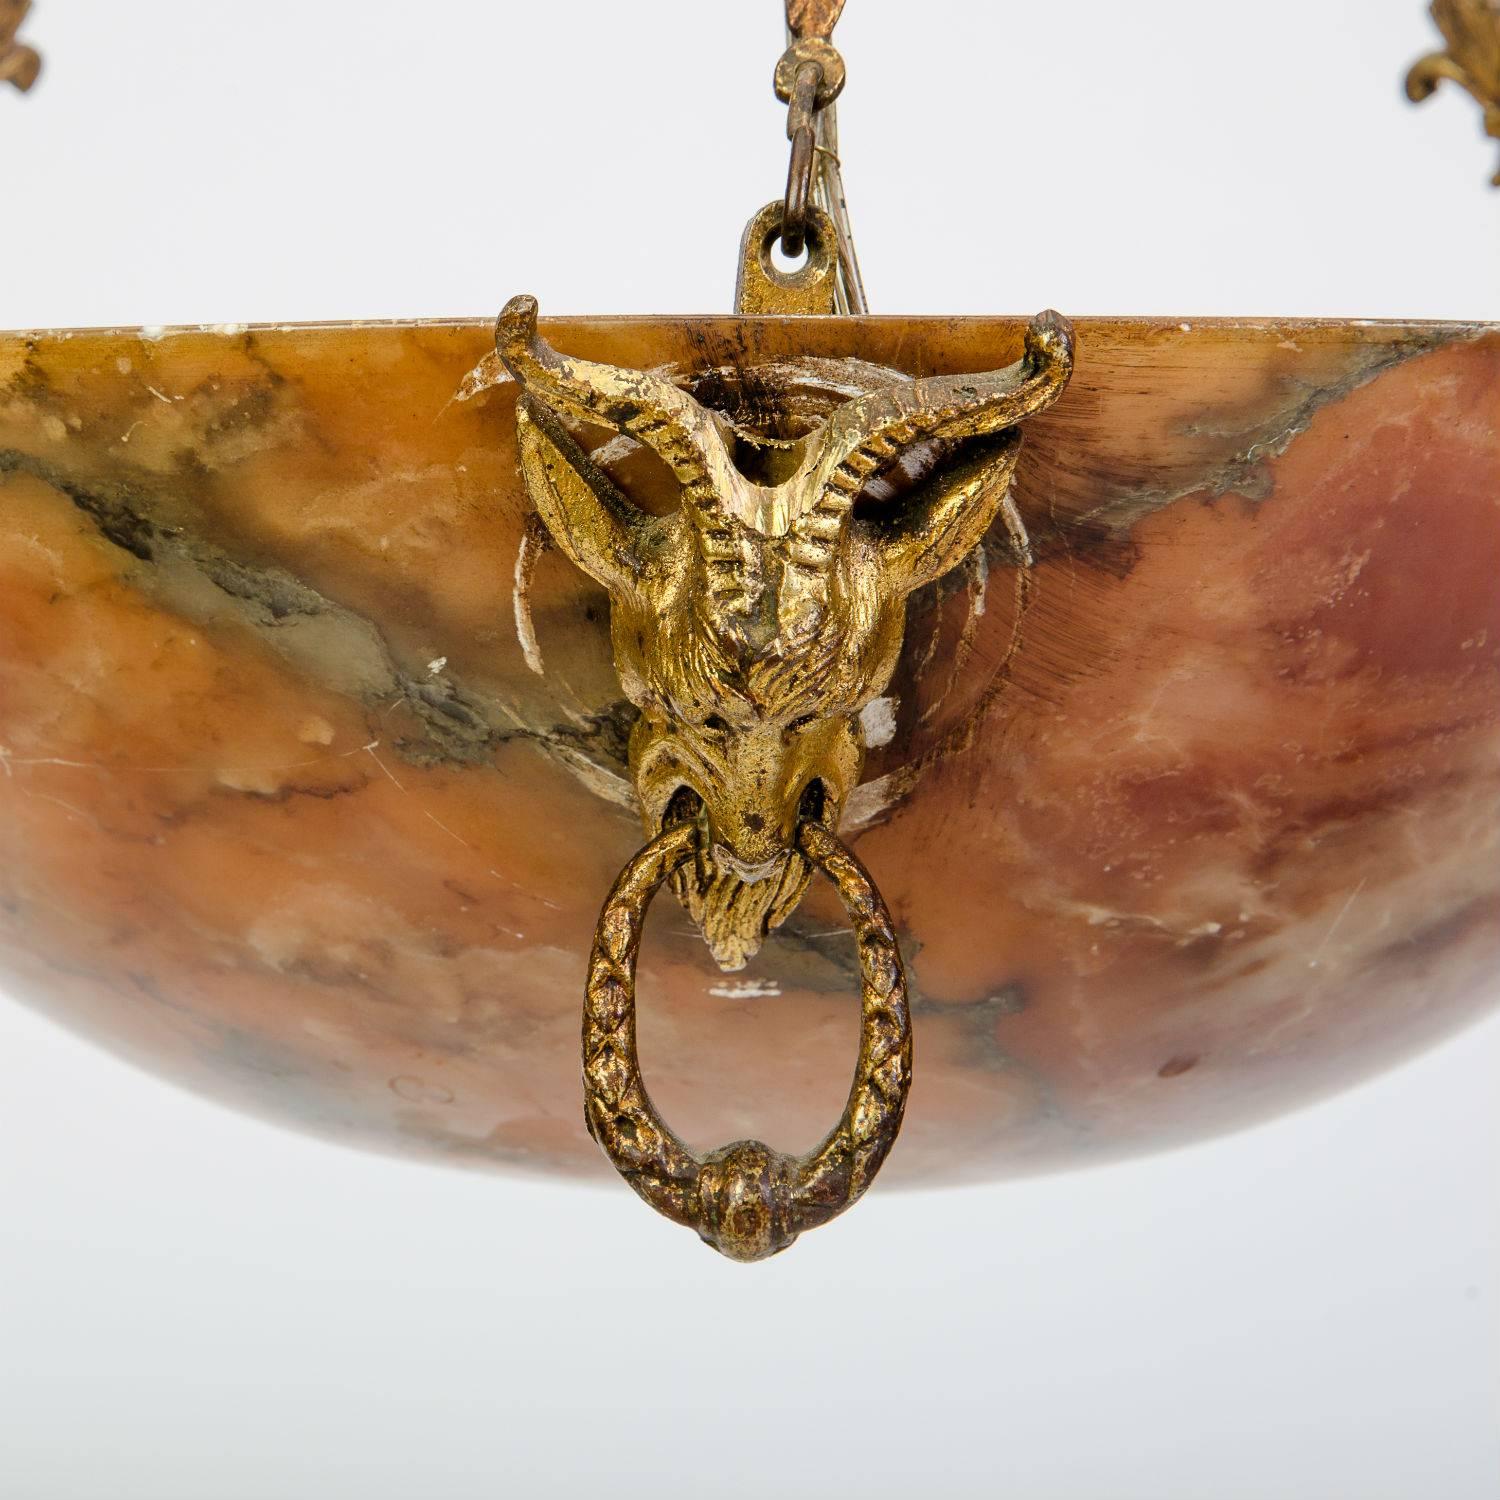 This 20th century amber alabaster light fixture hangs on ormolu mounts and decorated with heavily carved goat detailing and fleur-de-lis chains. 

Bowl dimensions: 4.25